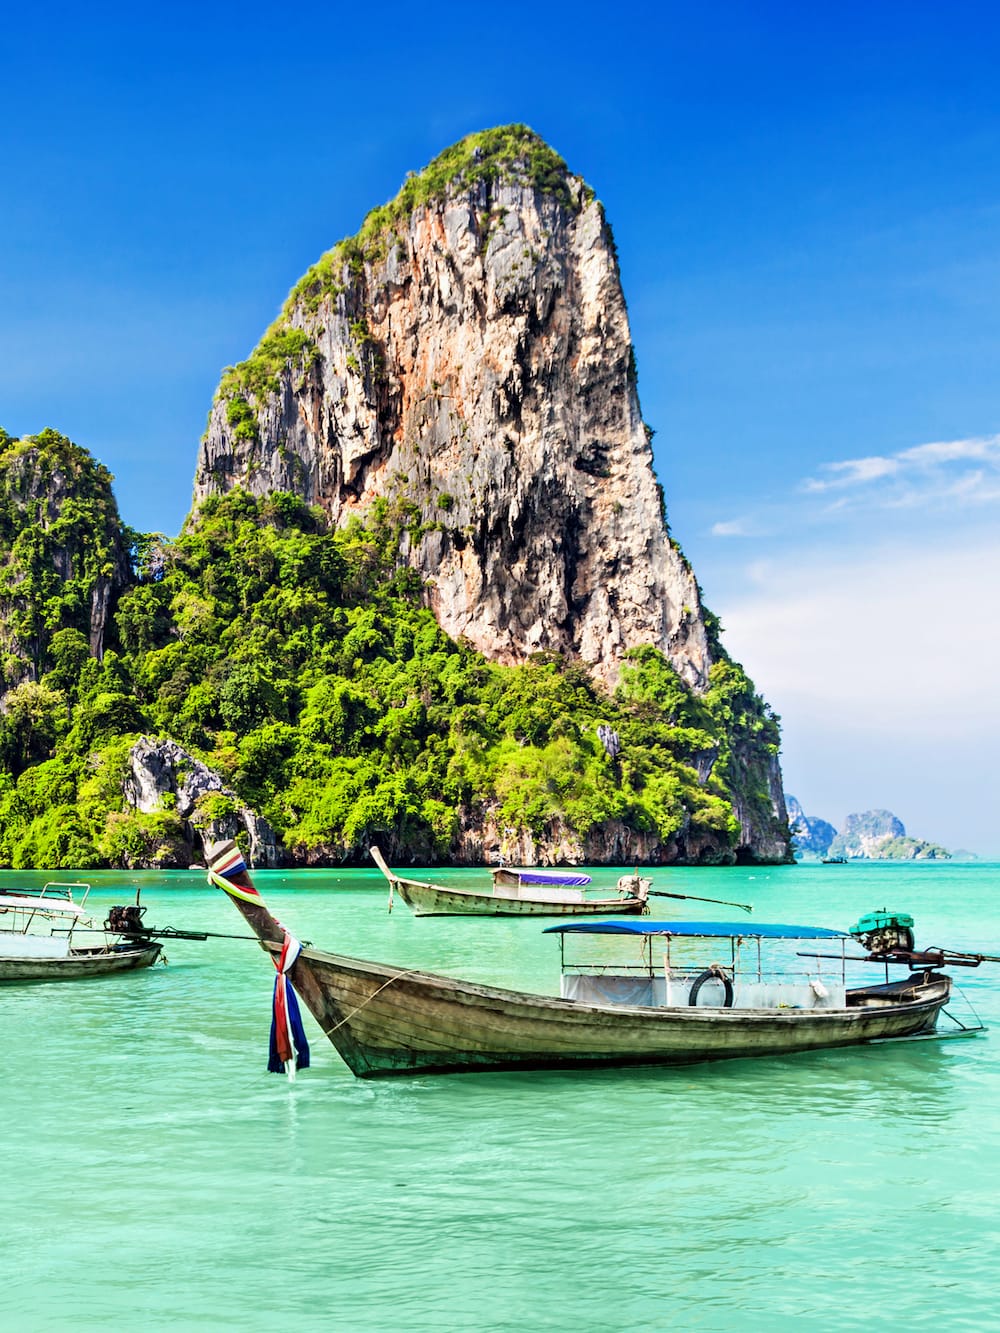 main places to visit in thailand